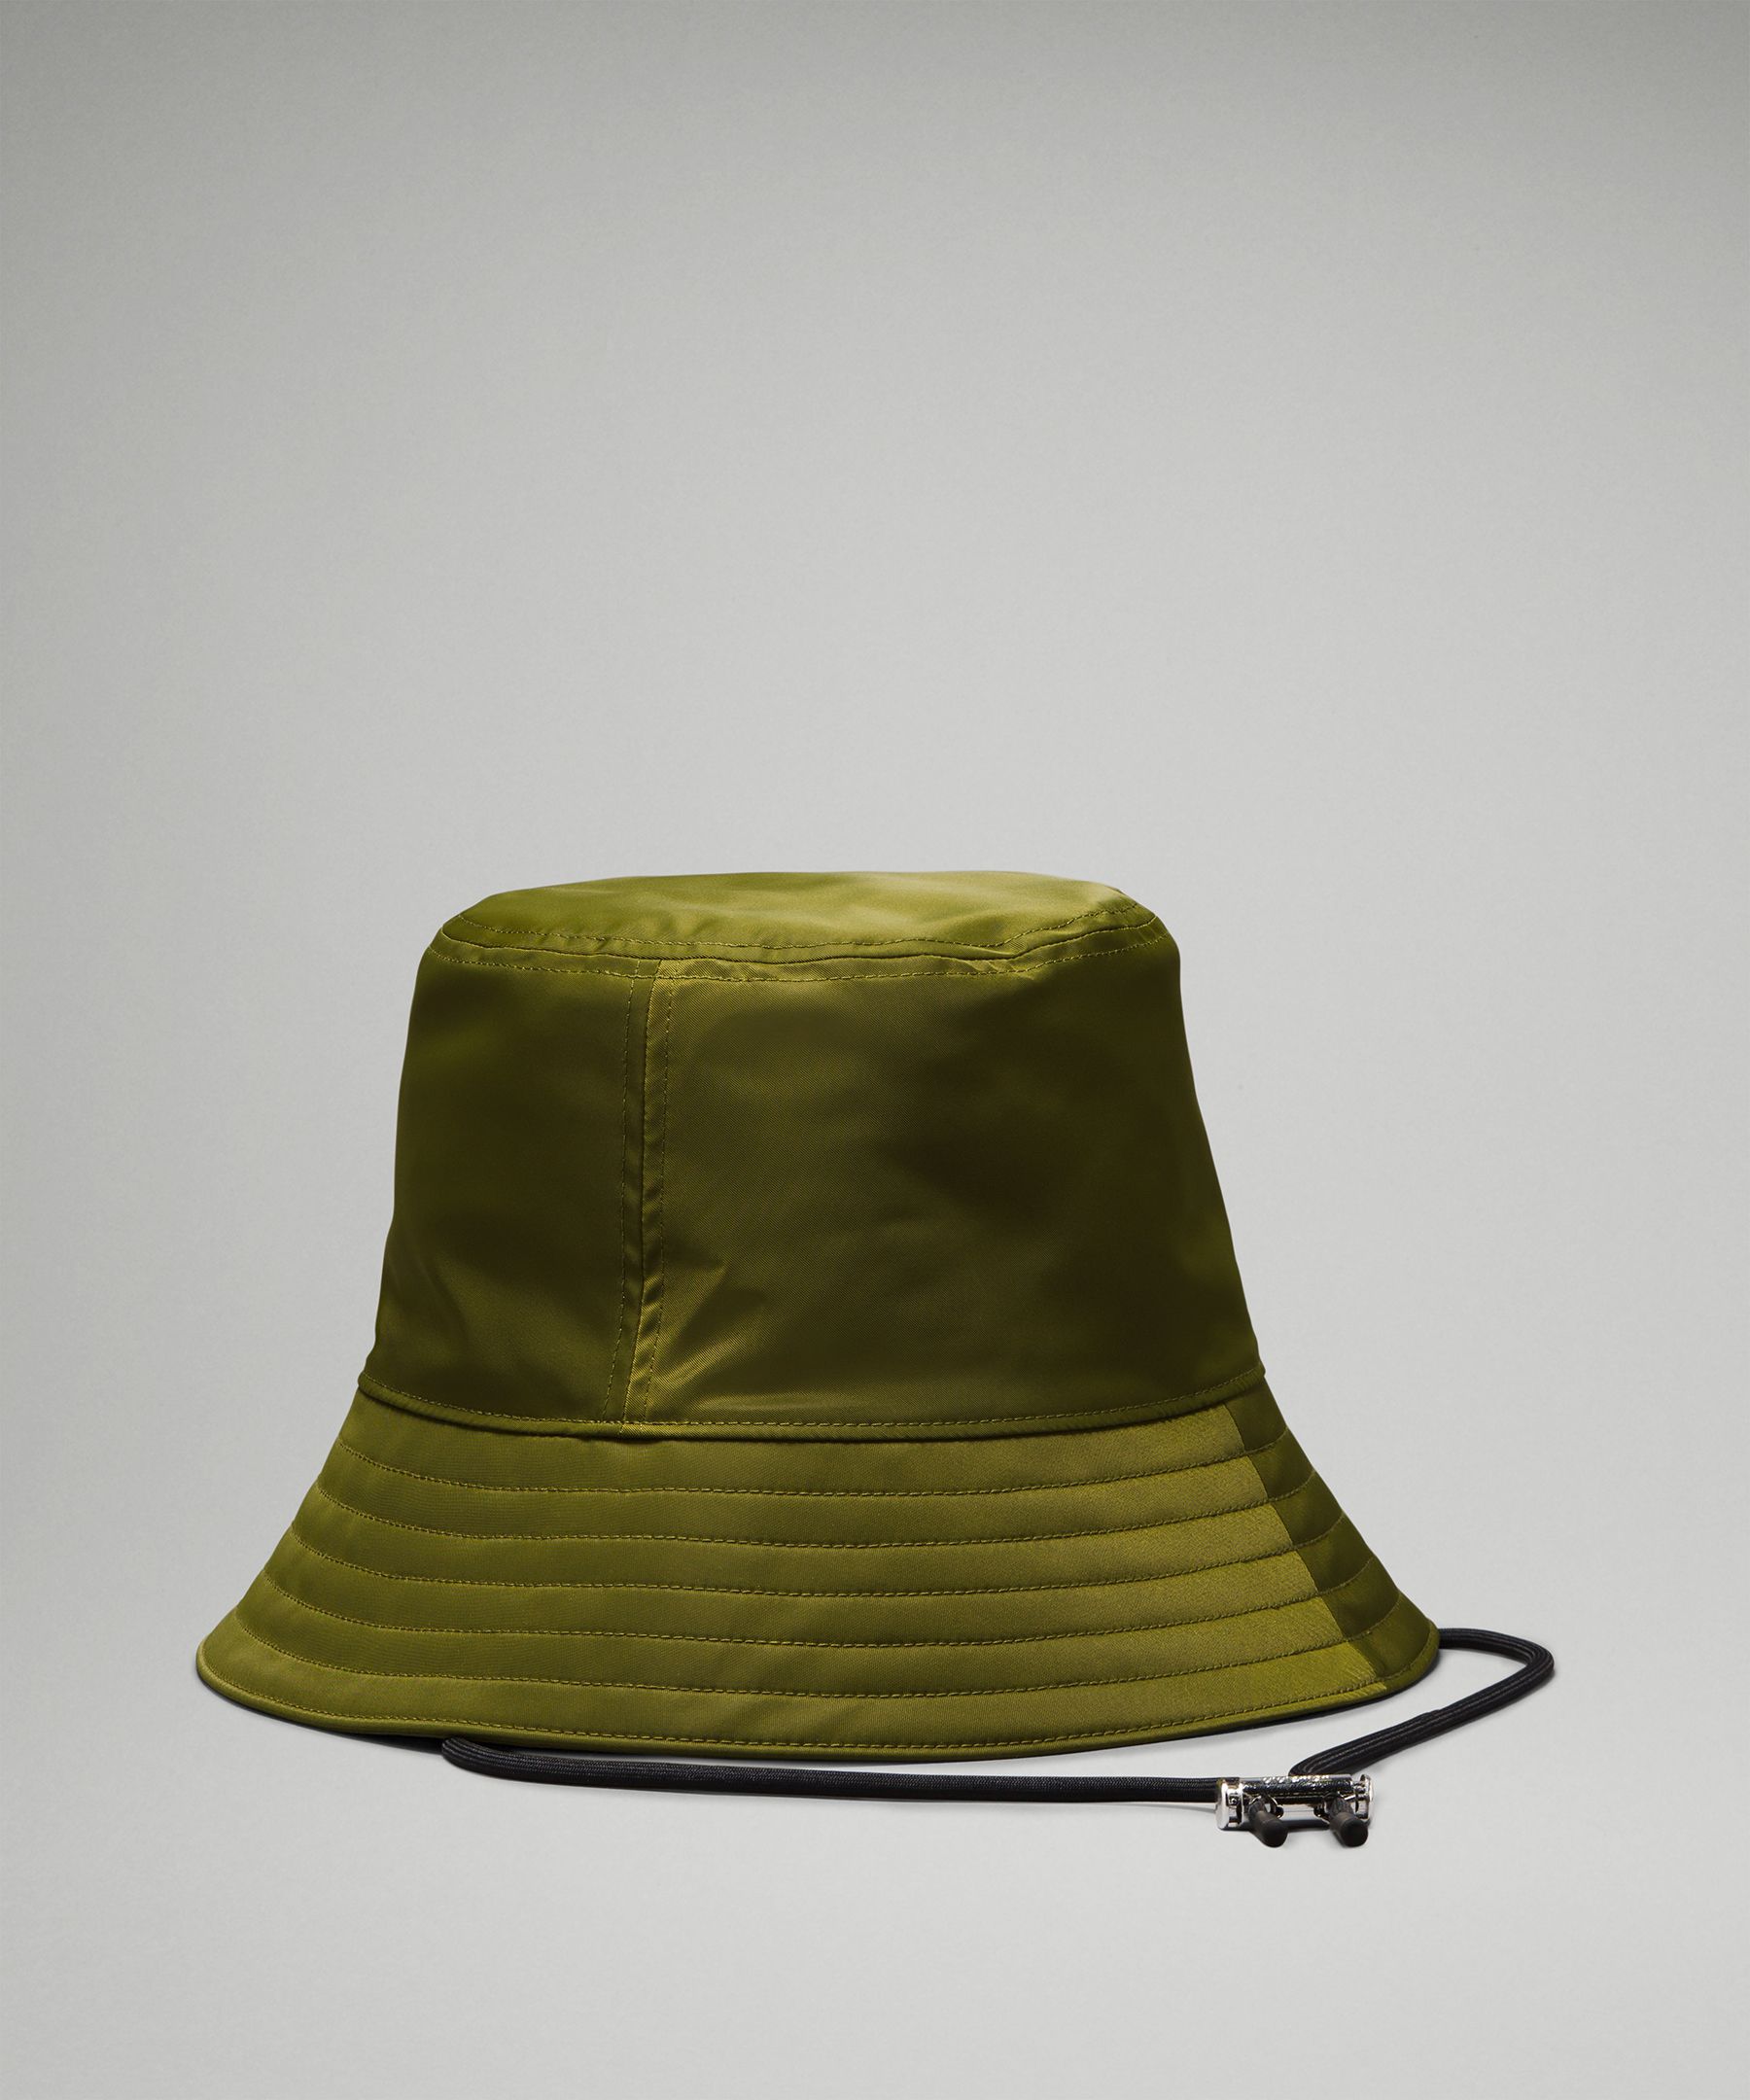 Lululemon Camo Bucket Hats For Men  International Society of Precision  Agriculture